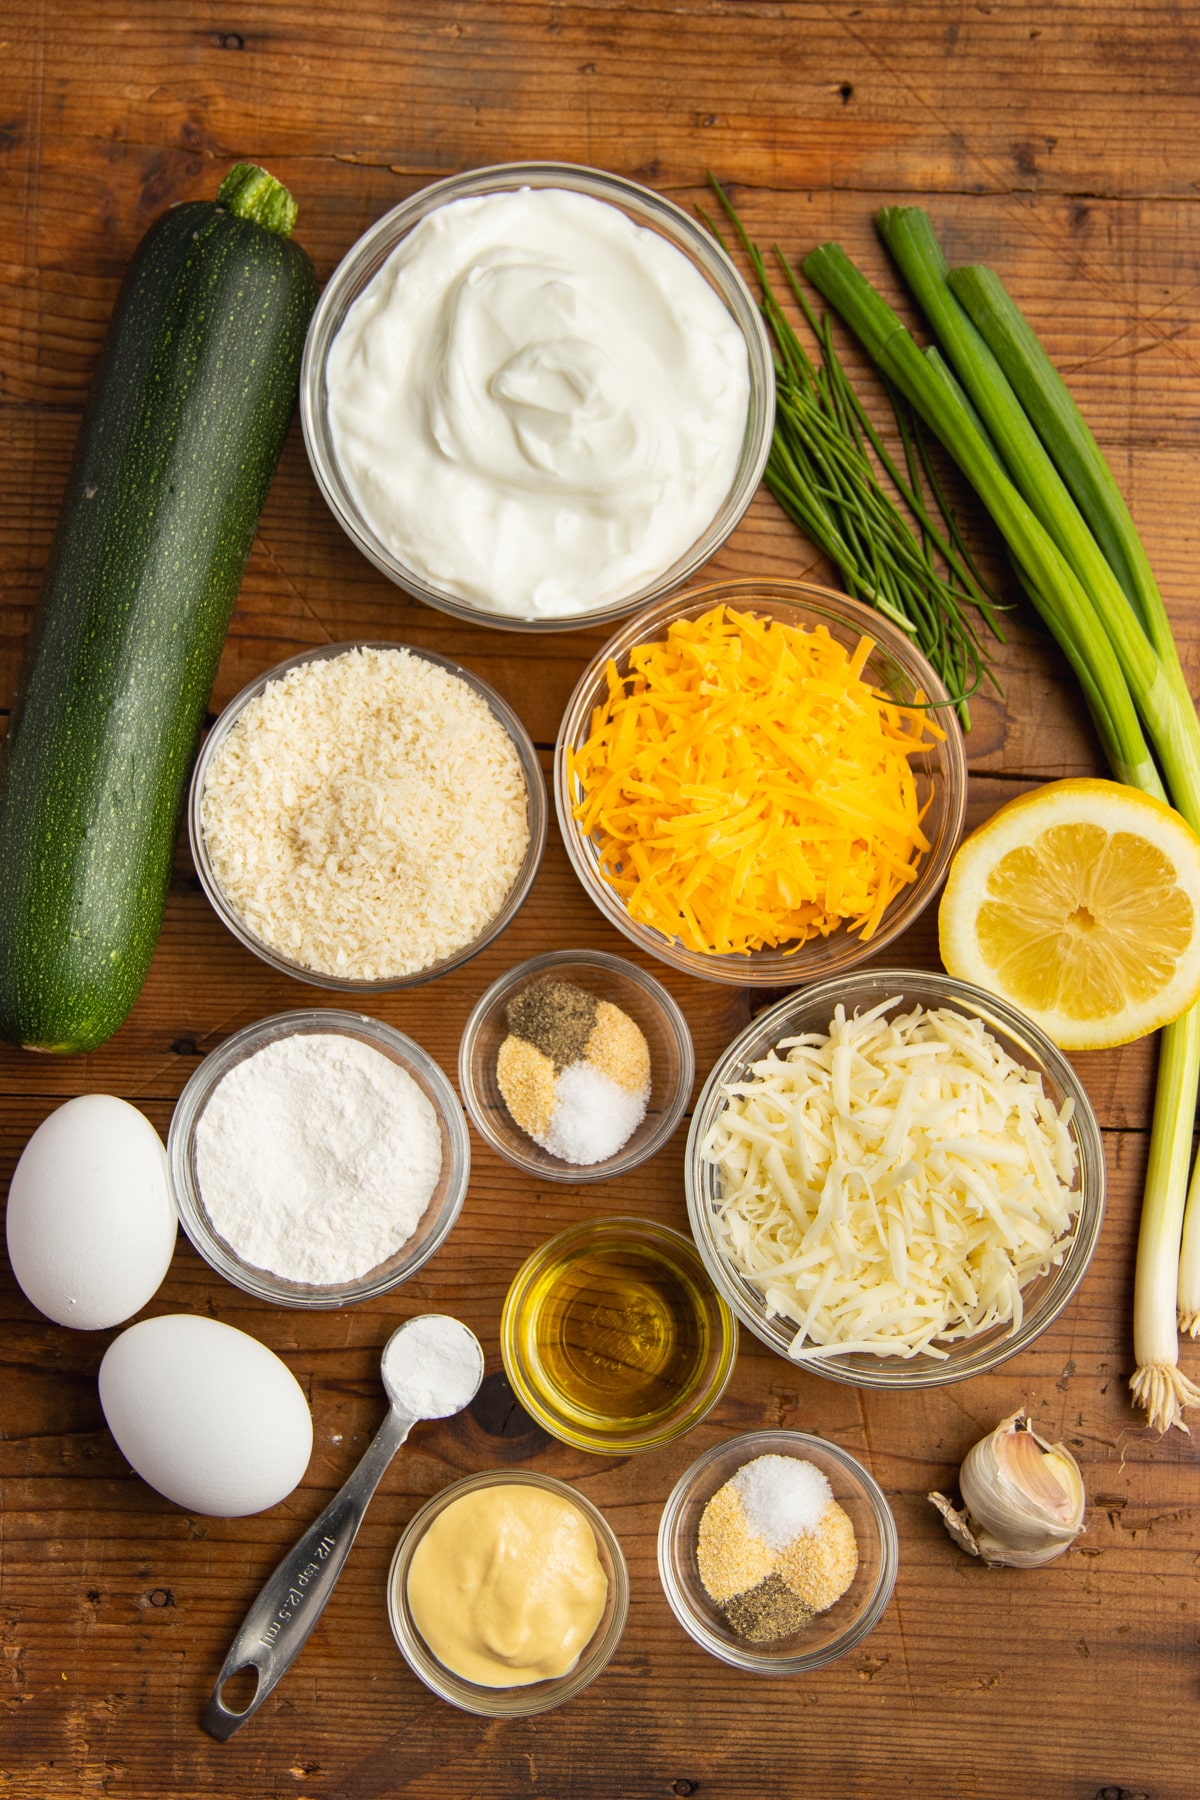 This is a picture of all the ingredients needed to make this recipe.